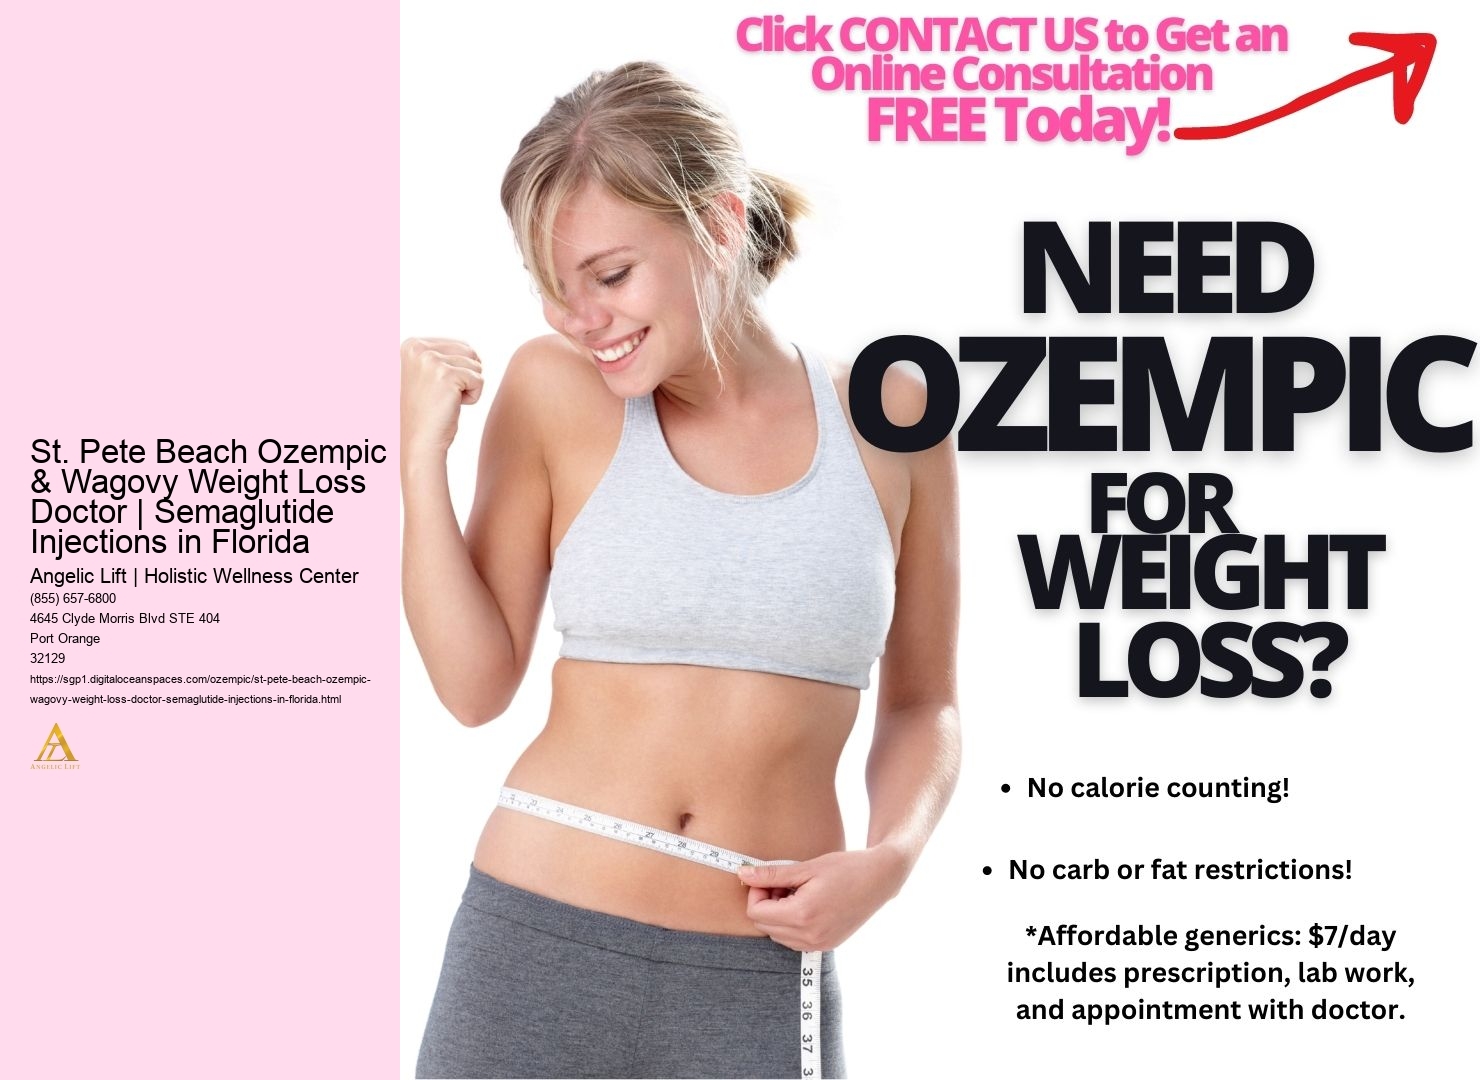 St. Pete Beach Ozempic & Wagovy Weight Loss Doctor | Semaglutide Injections in Florida